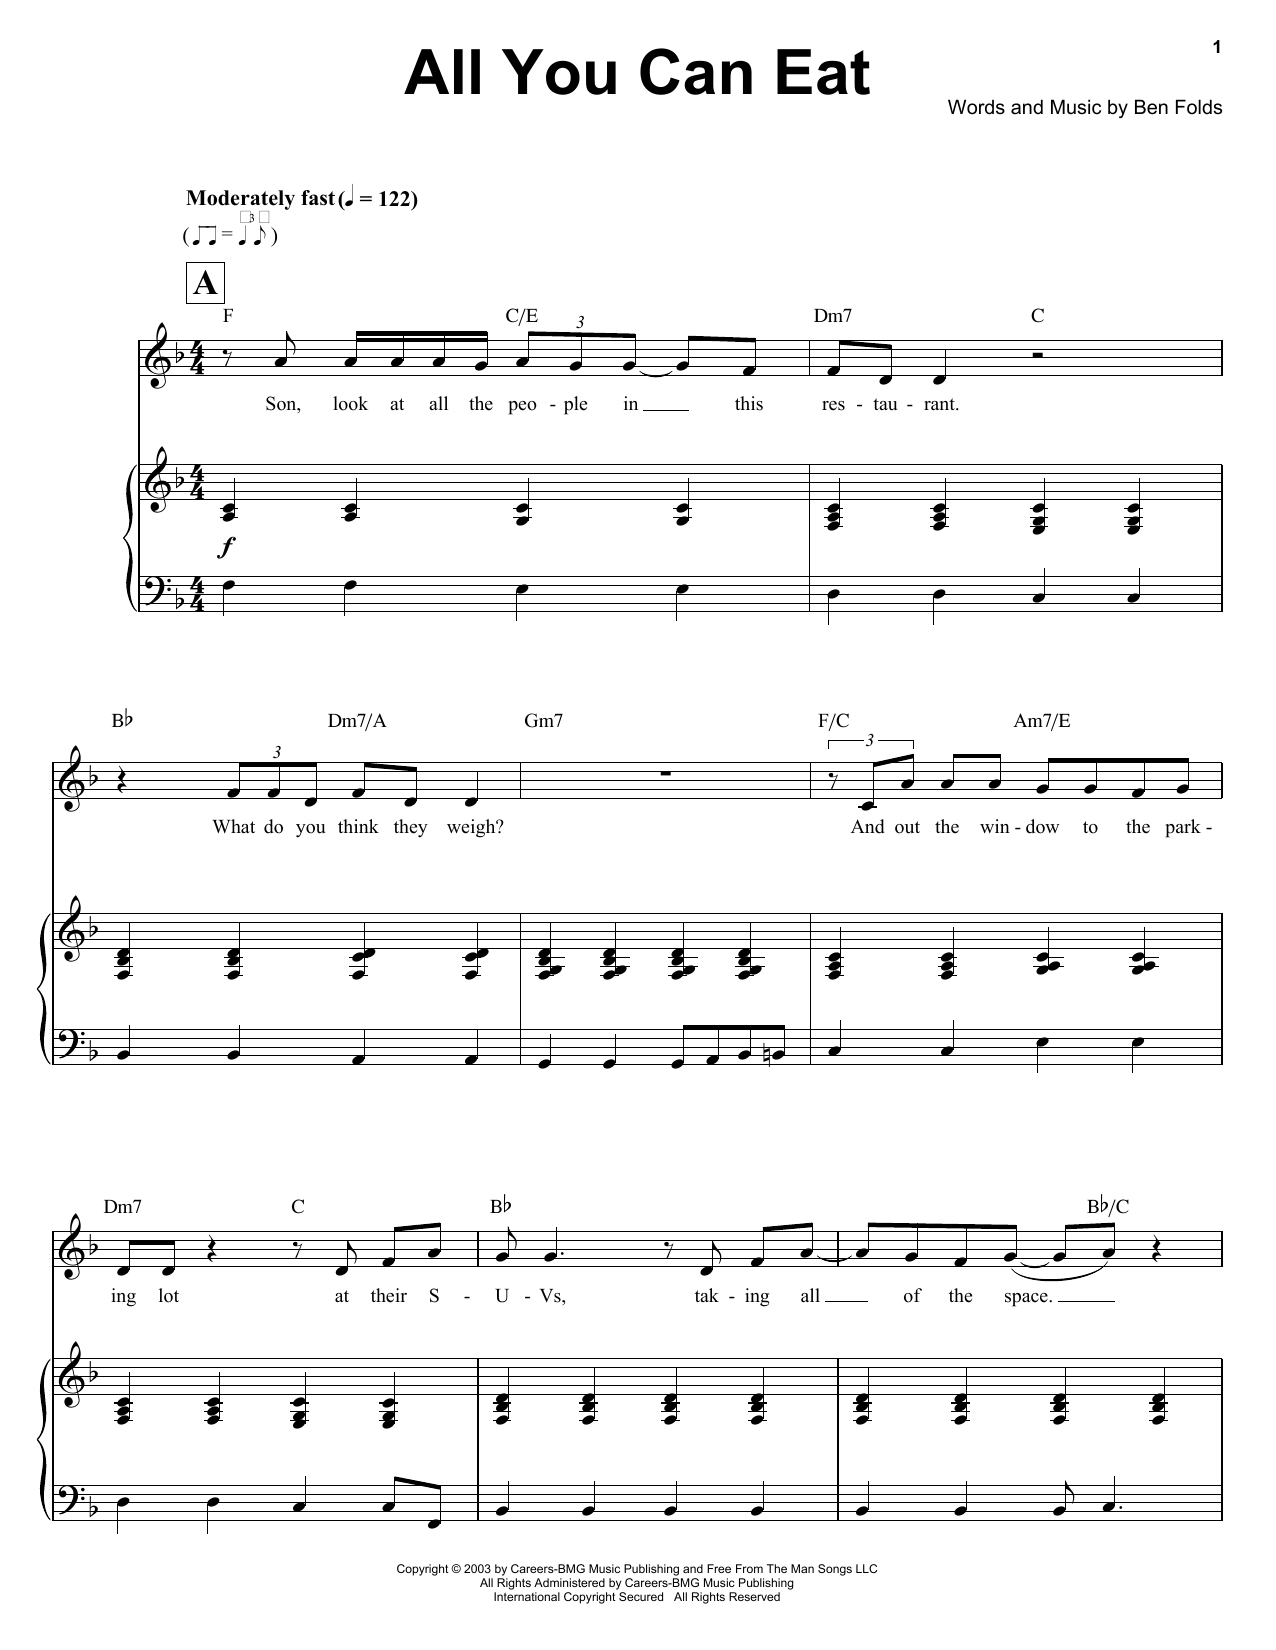 Download Ben Folds All You Can Eat Sheet Music